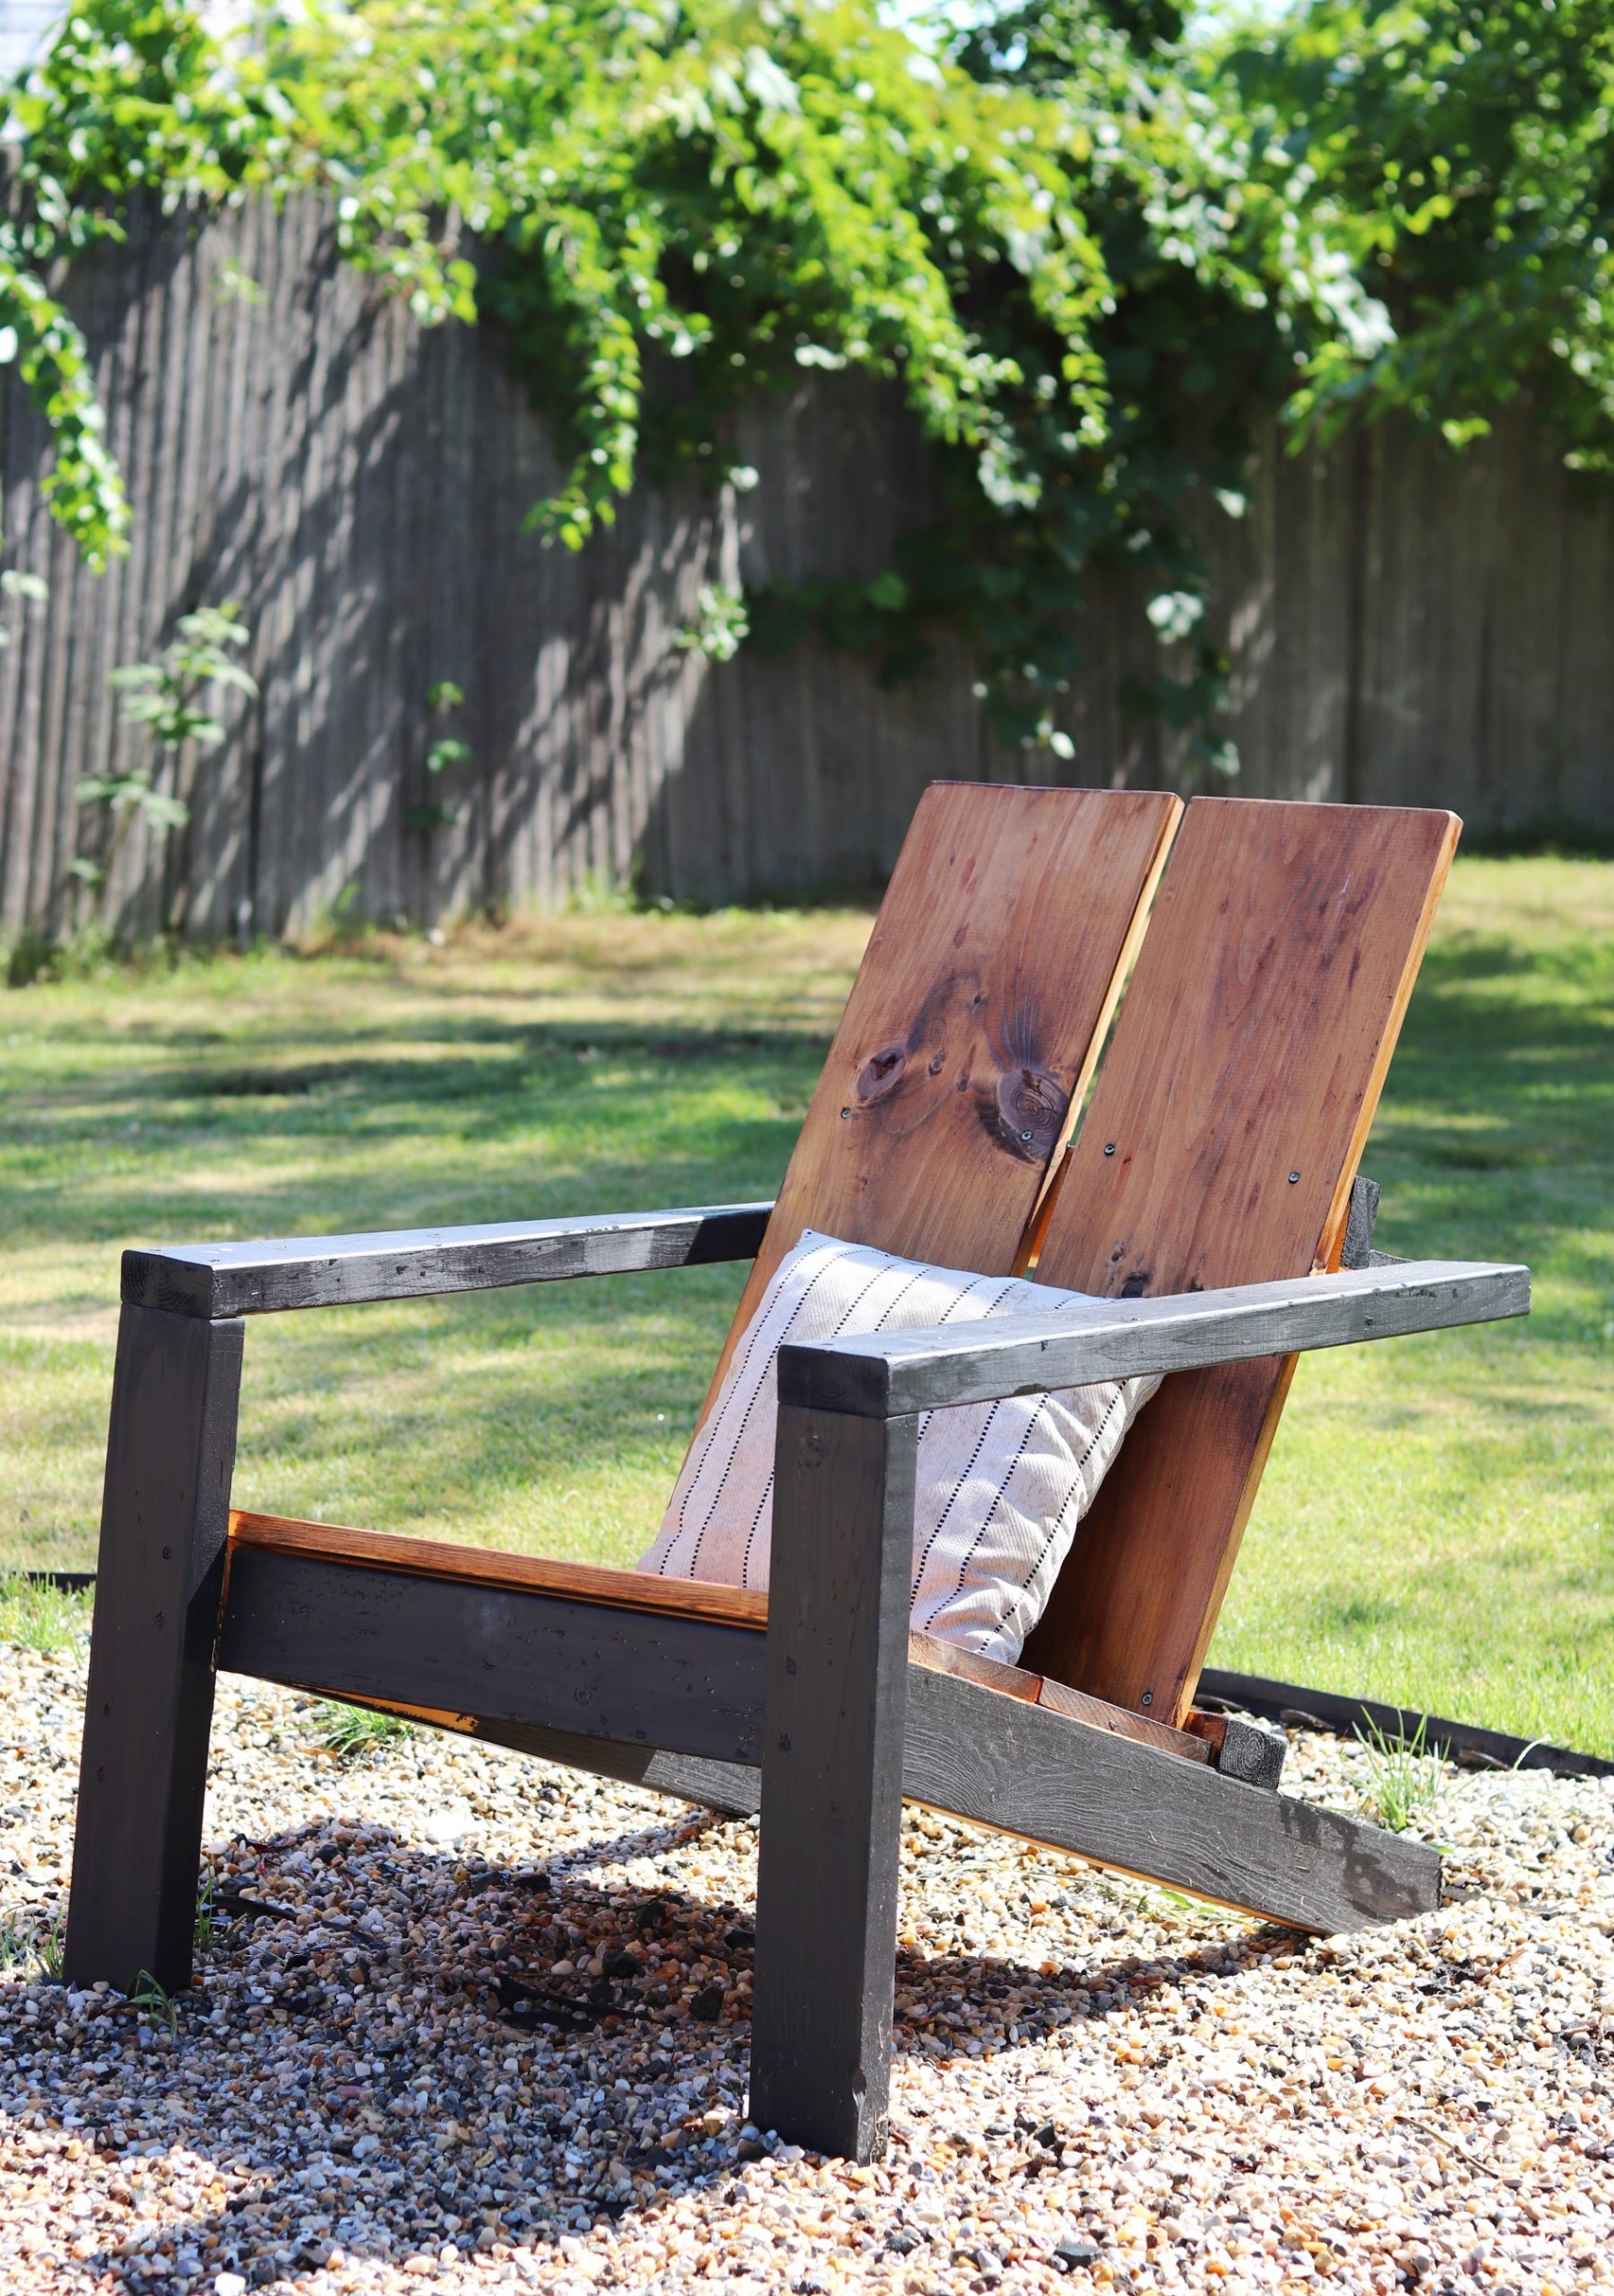 Get Crafty With DIY Adirondack Chair Plans For Stylish Outdoor Relaxation!